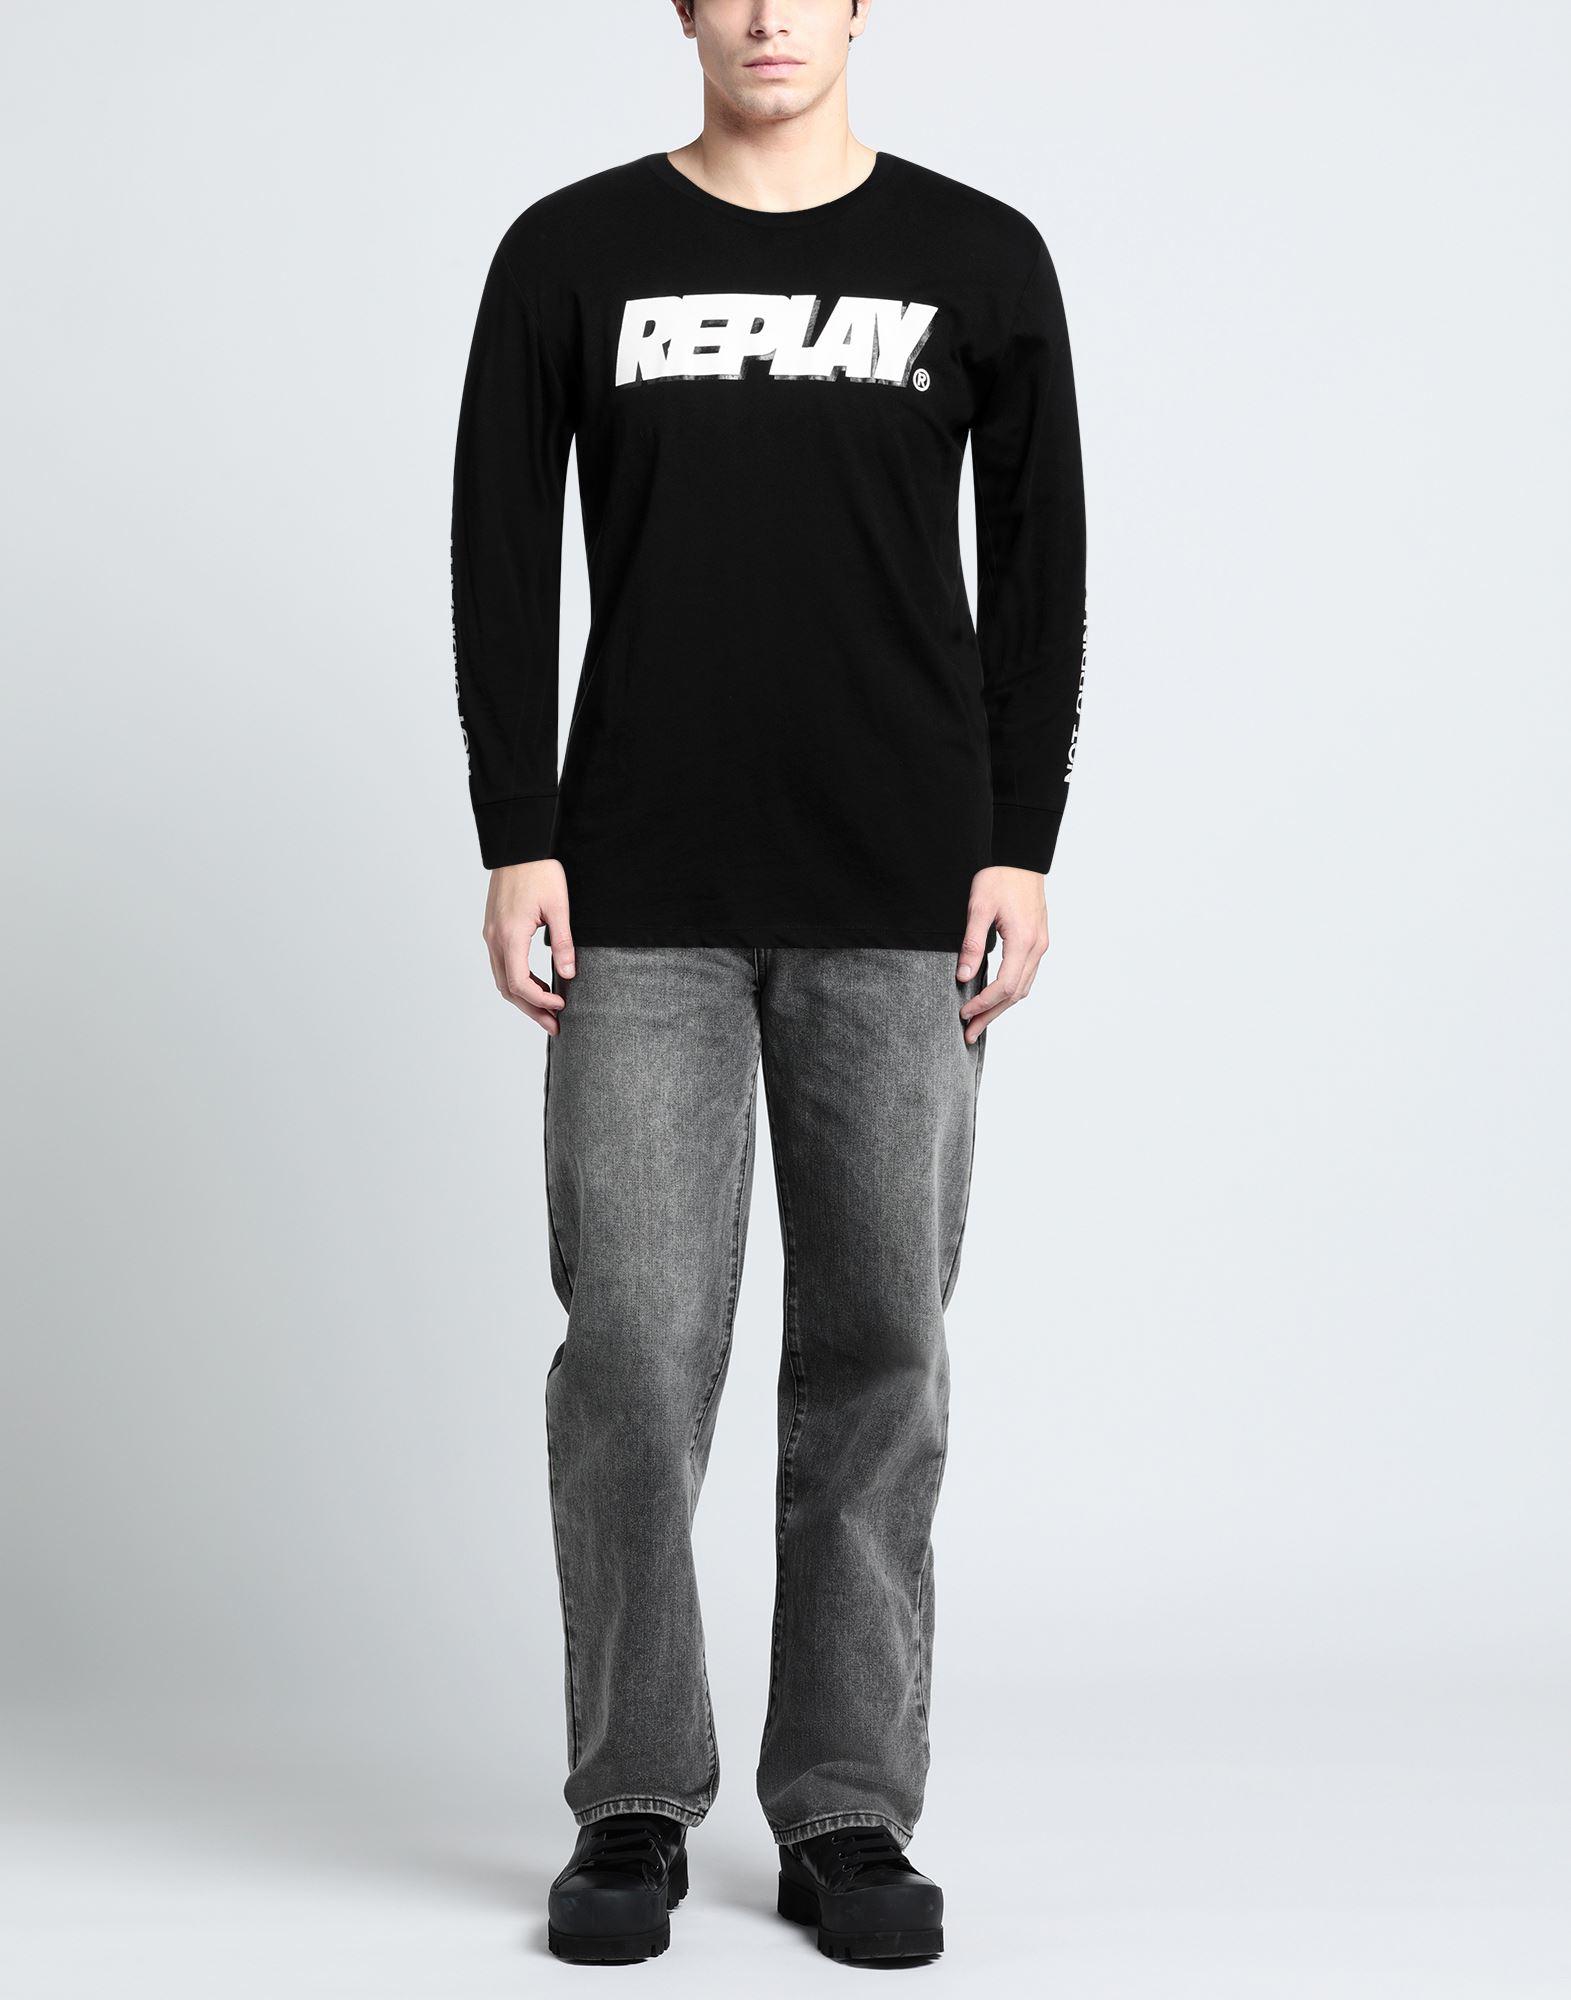 Replay T-shirt in Black for Men | Lyst